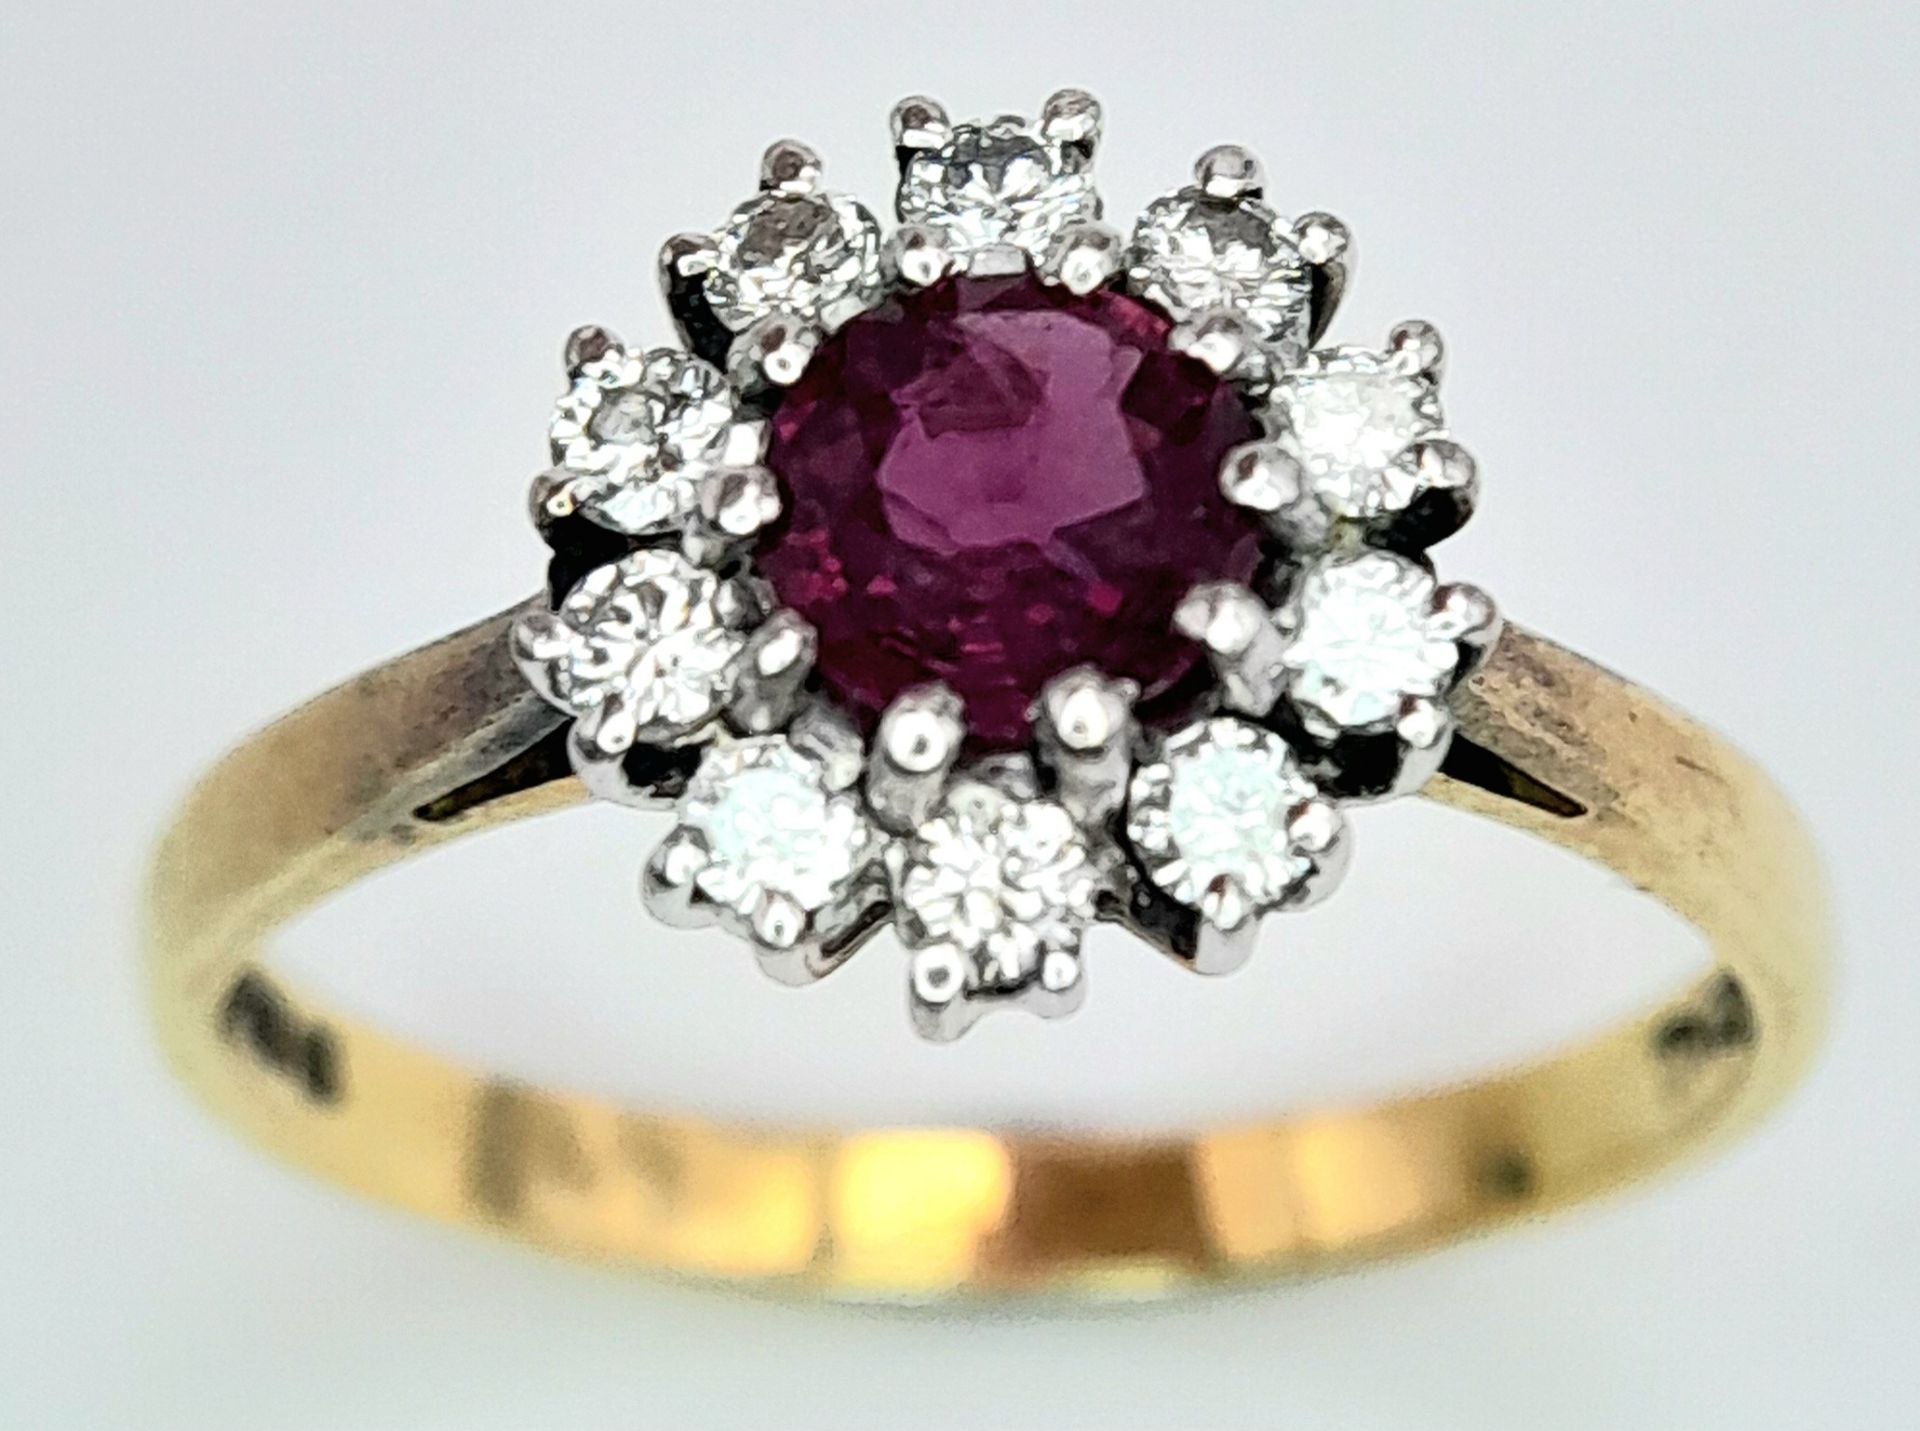 An 18K Yellow Gold, Ruby and Diamond Ring. Round cut ruby with a diamond halo. Size M 1/2. 2.8g - Image 2 of 8